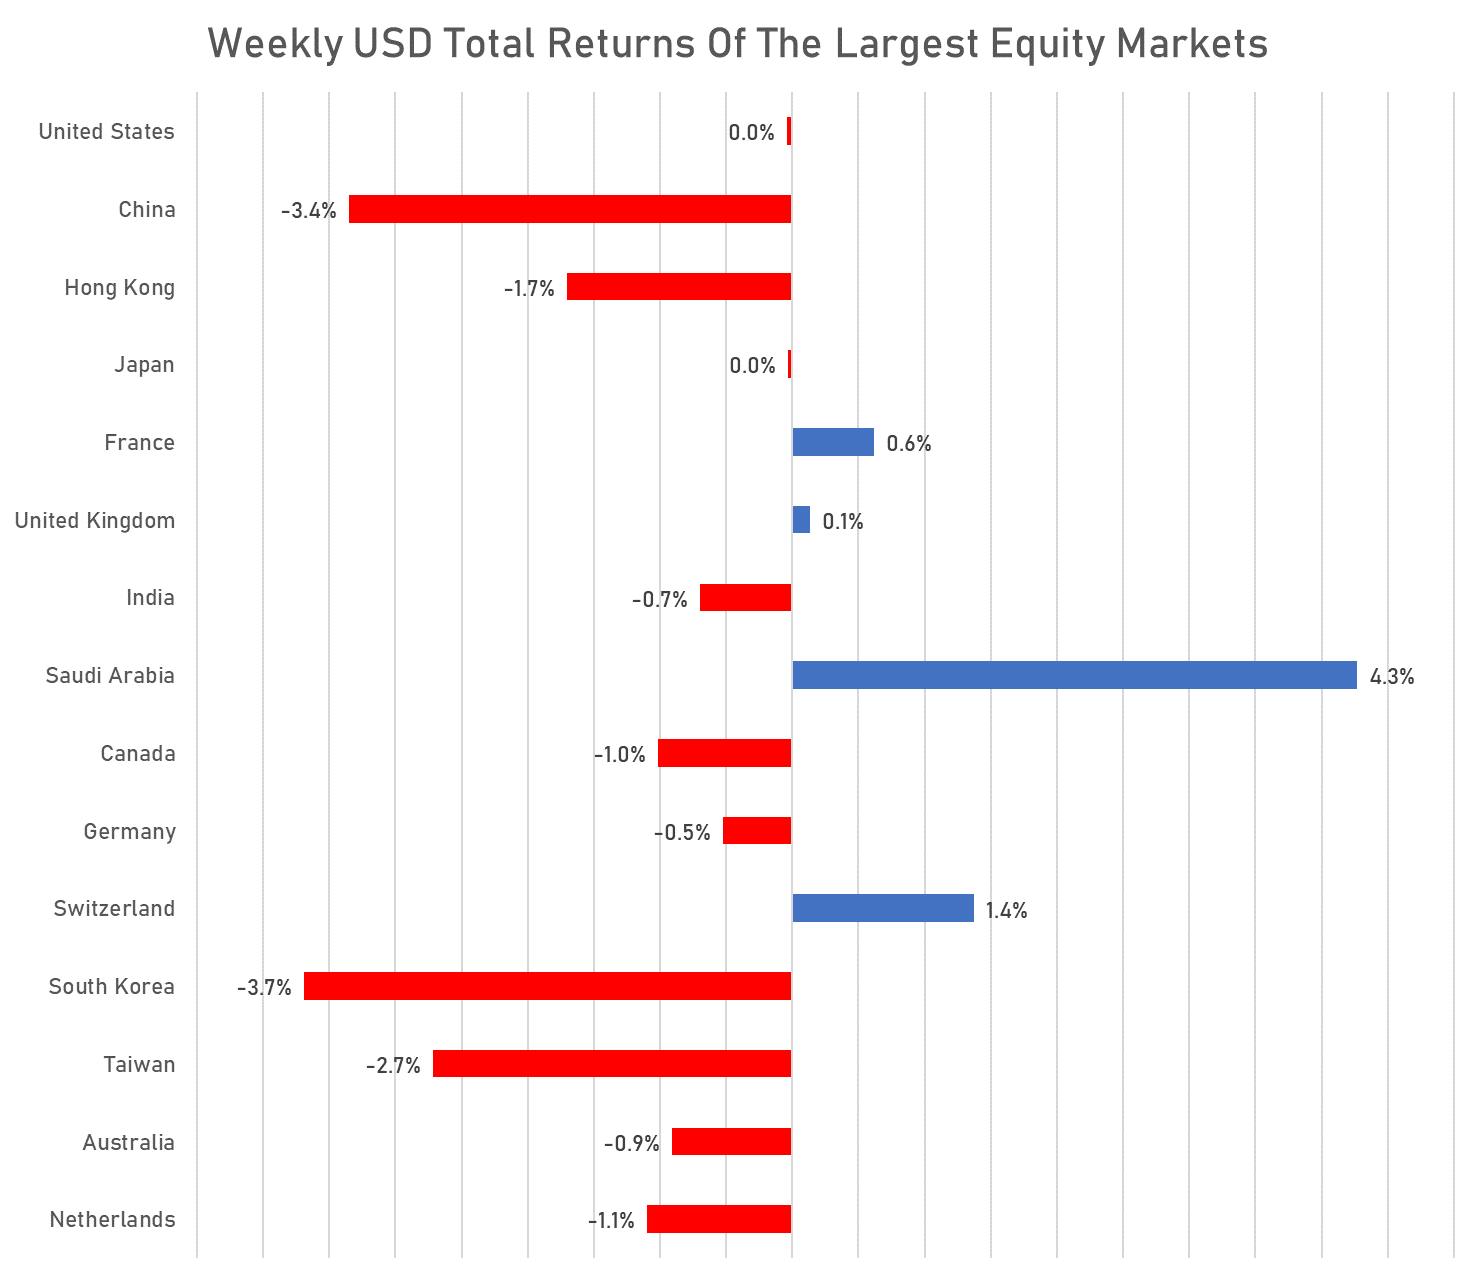 Weekly USD Total Returns | Sources: phipost.com, FactSet data